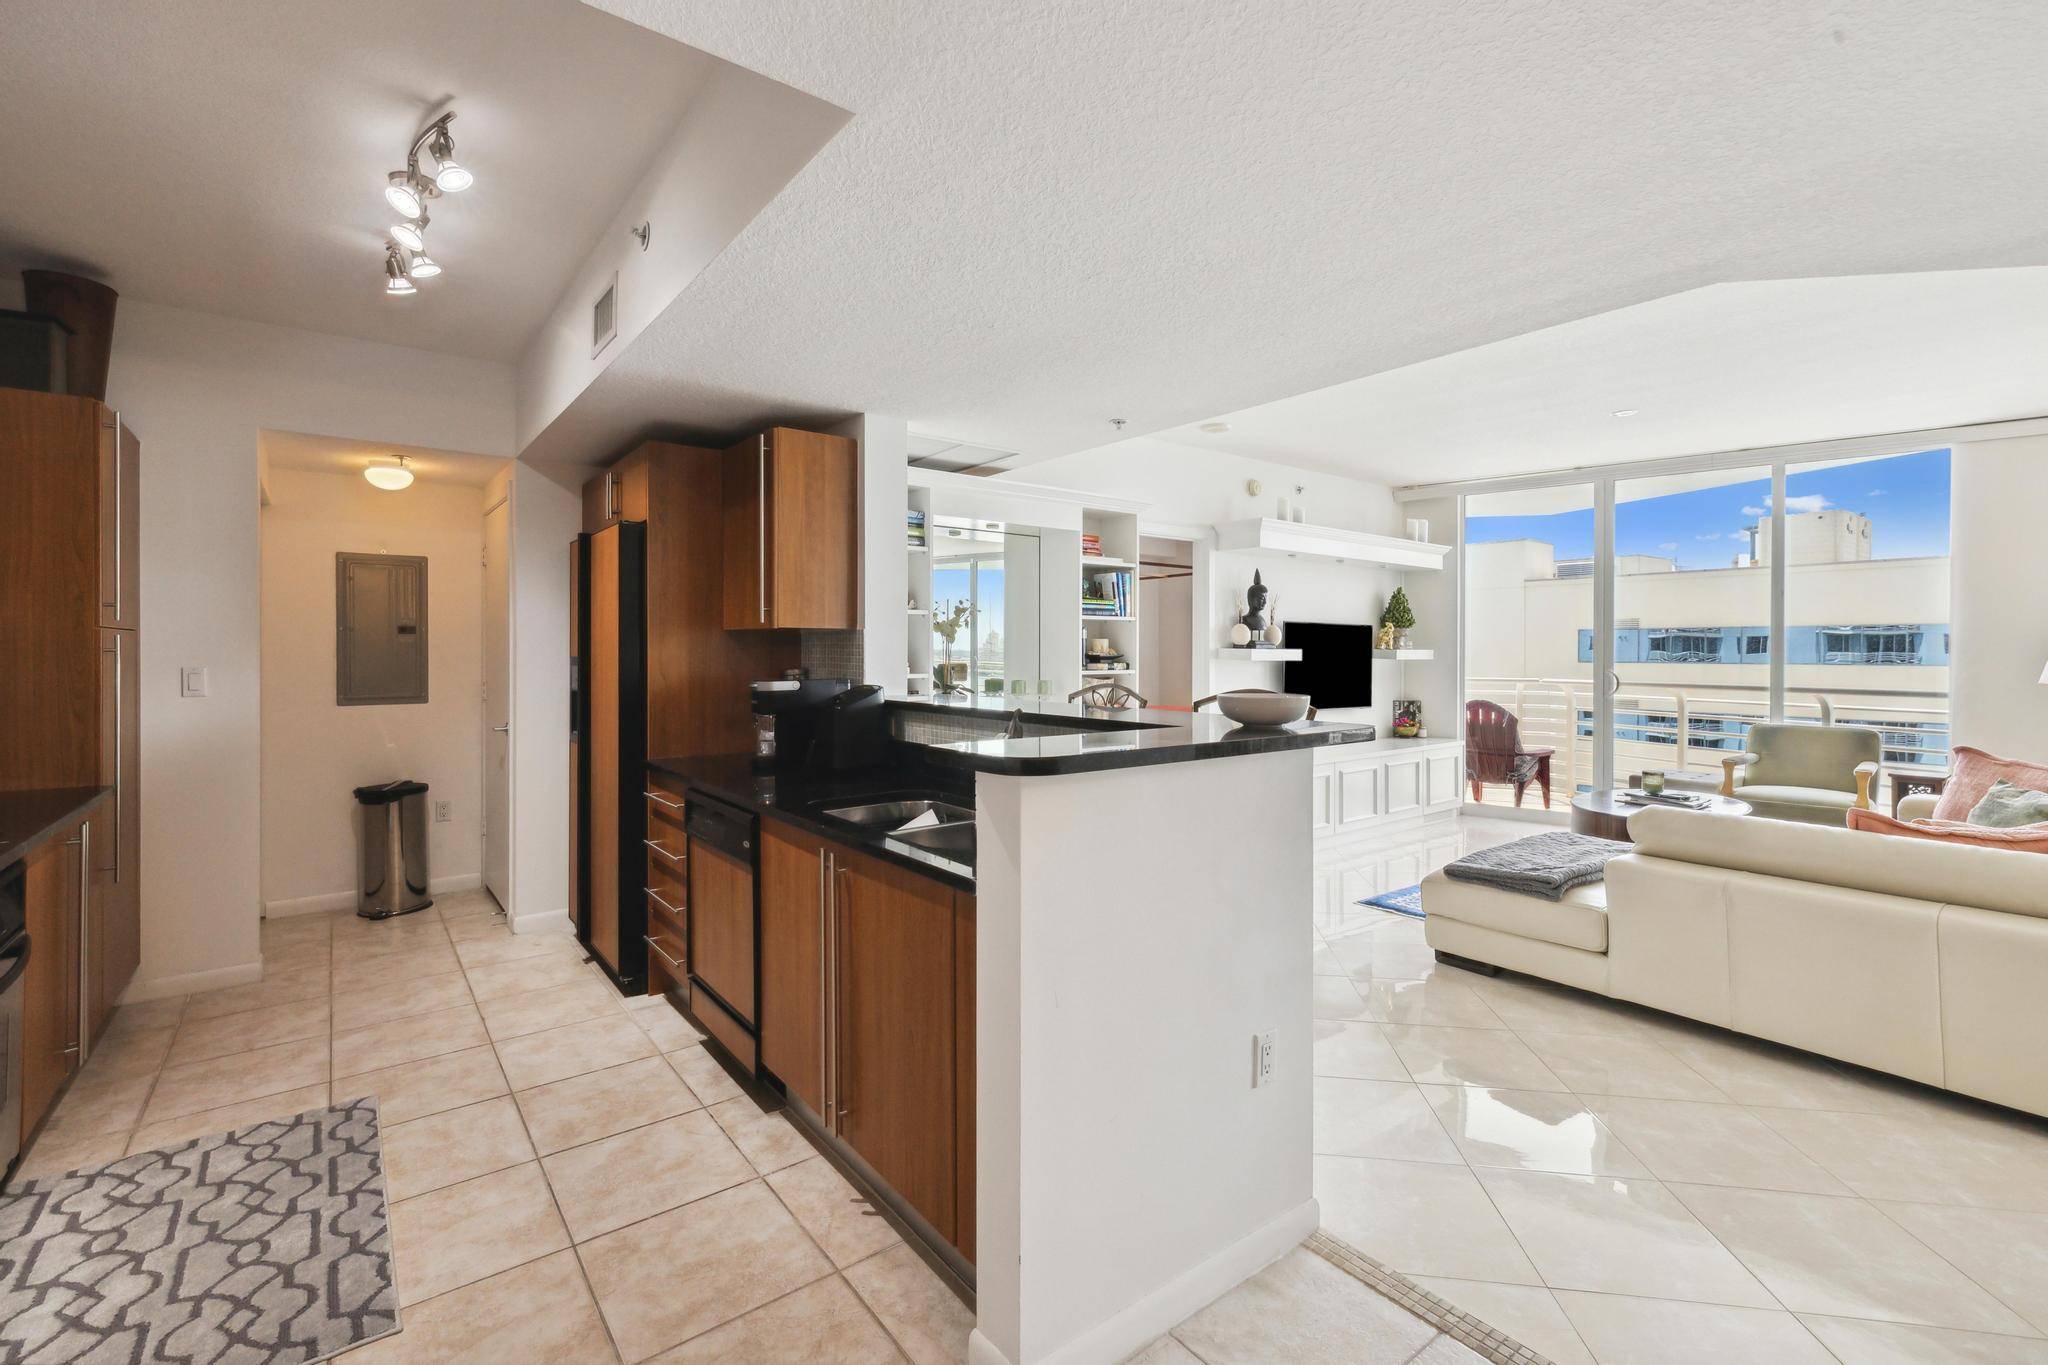 Rarely available for lease, this stunning 3 bedroom 3 bathroom condo at The Slade.